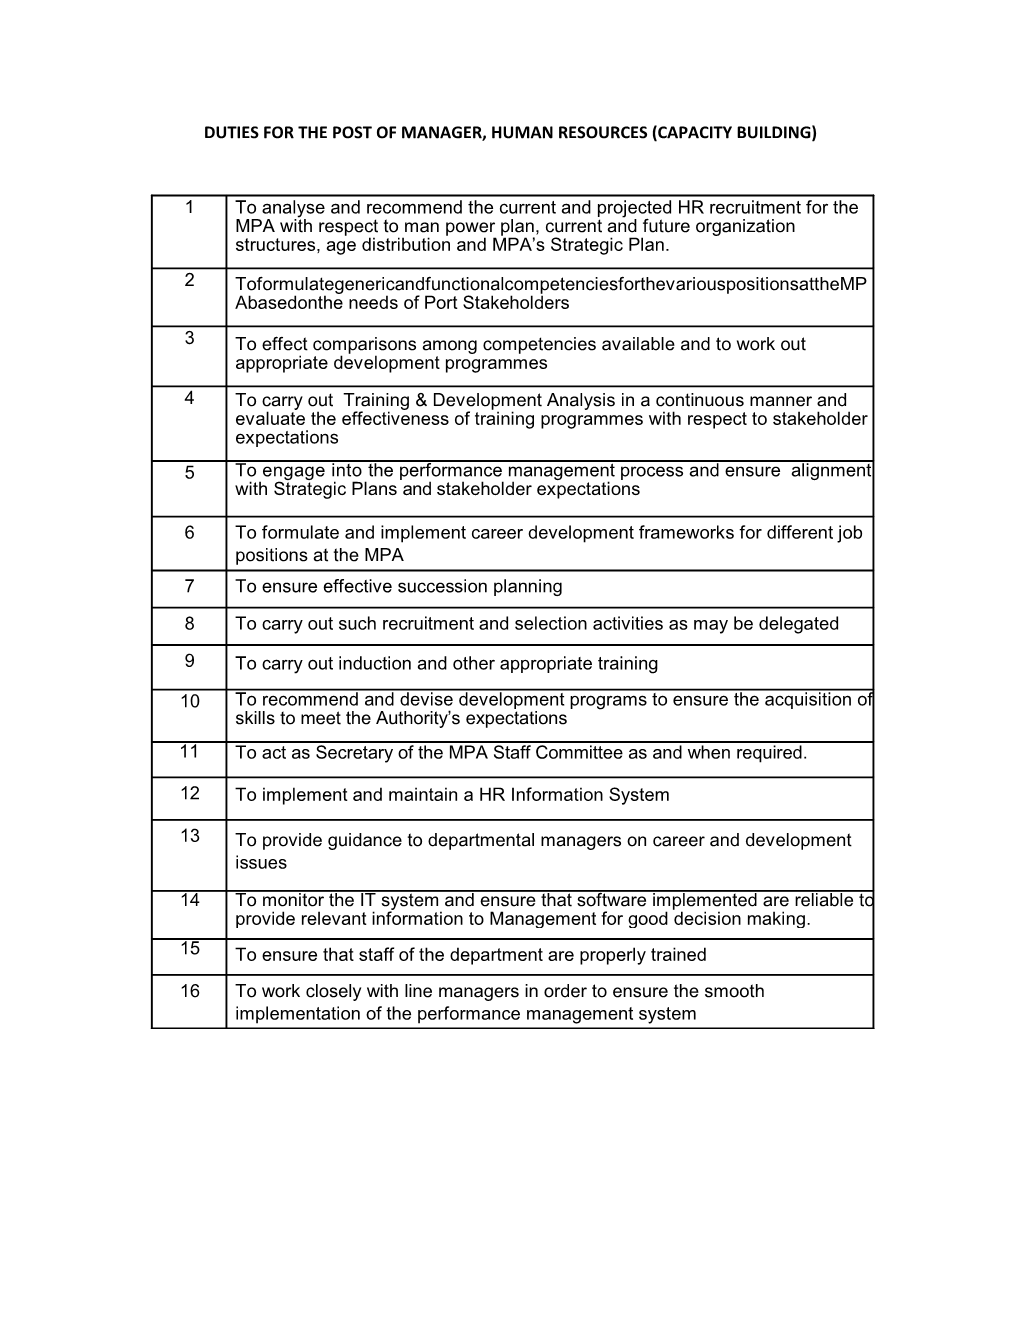 Duties for the Post of Manger, Human Resources (Capacity Building)